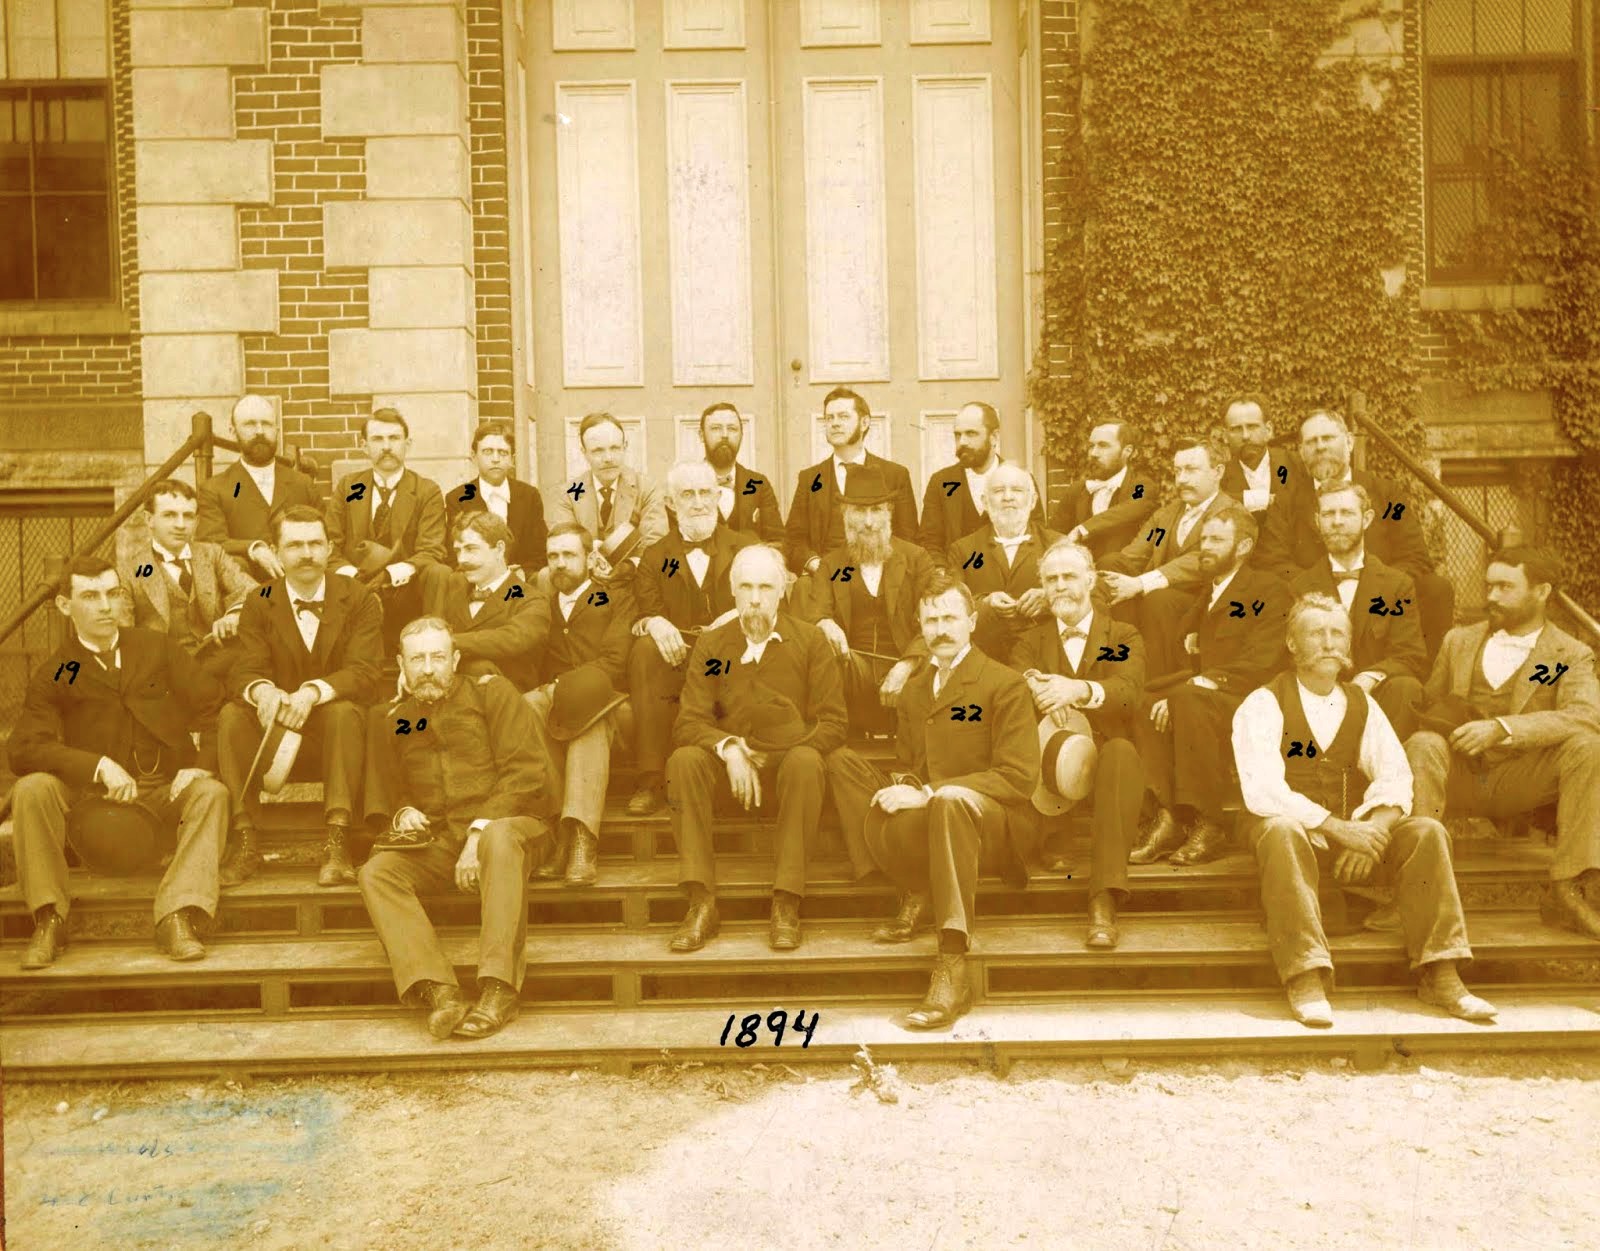 After graduating Princeton, Arthur M. Miller spent a year as professor of natural history at Wilson College, another year studying abroad at University of Munich, and then took a post at Agricultural and Mechanical College of Kentucky in 1892 as professor of geology. He remained at UK until his death in 1929. He is #25 in this photo of the institution's faculty. Photo courtesy of UK Special Collections.